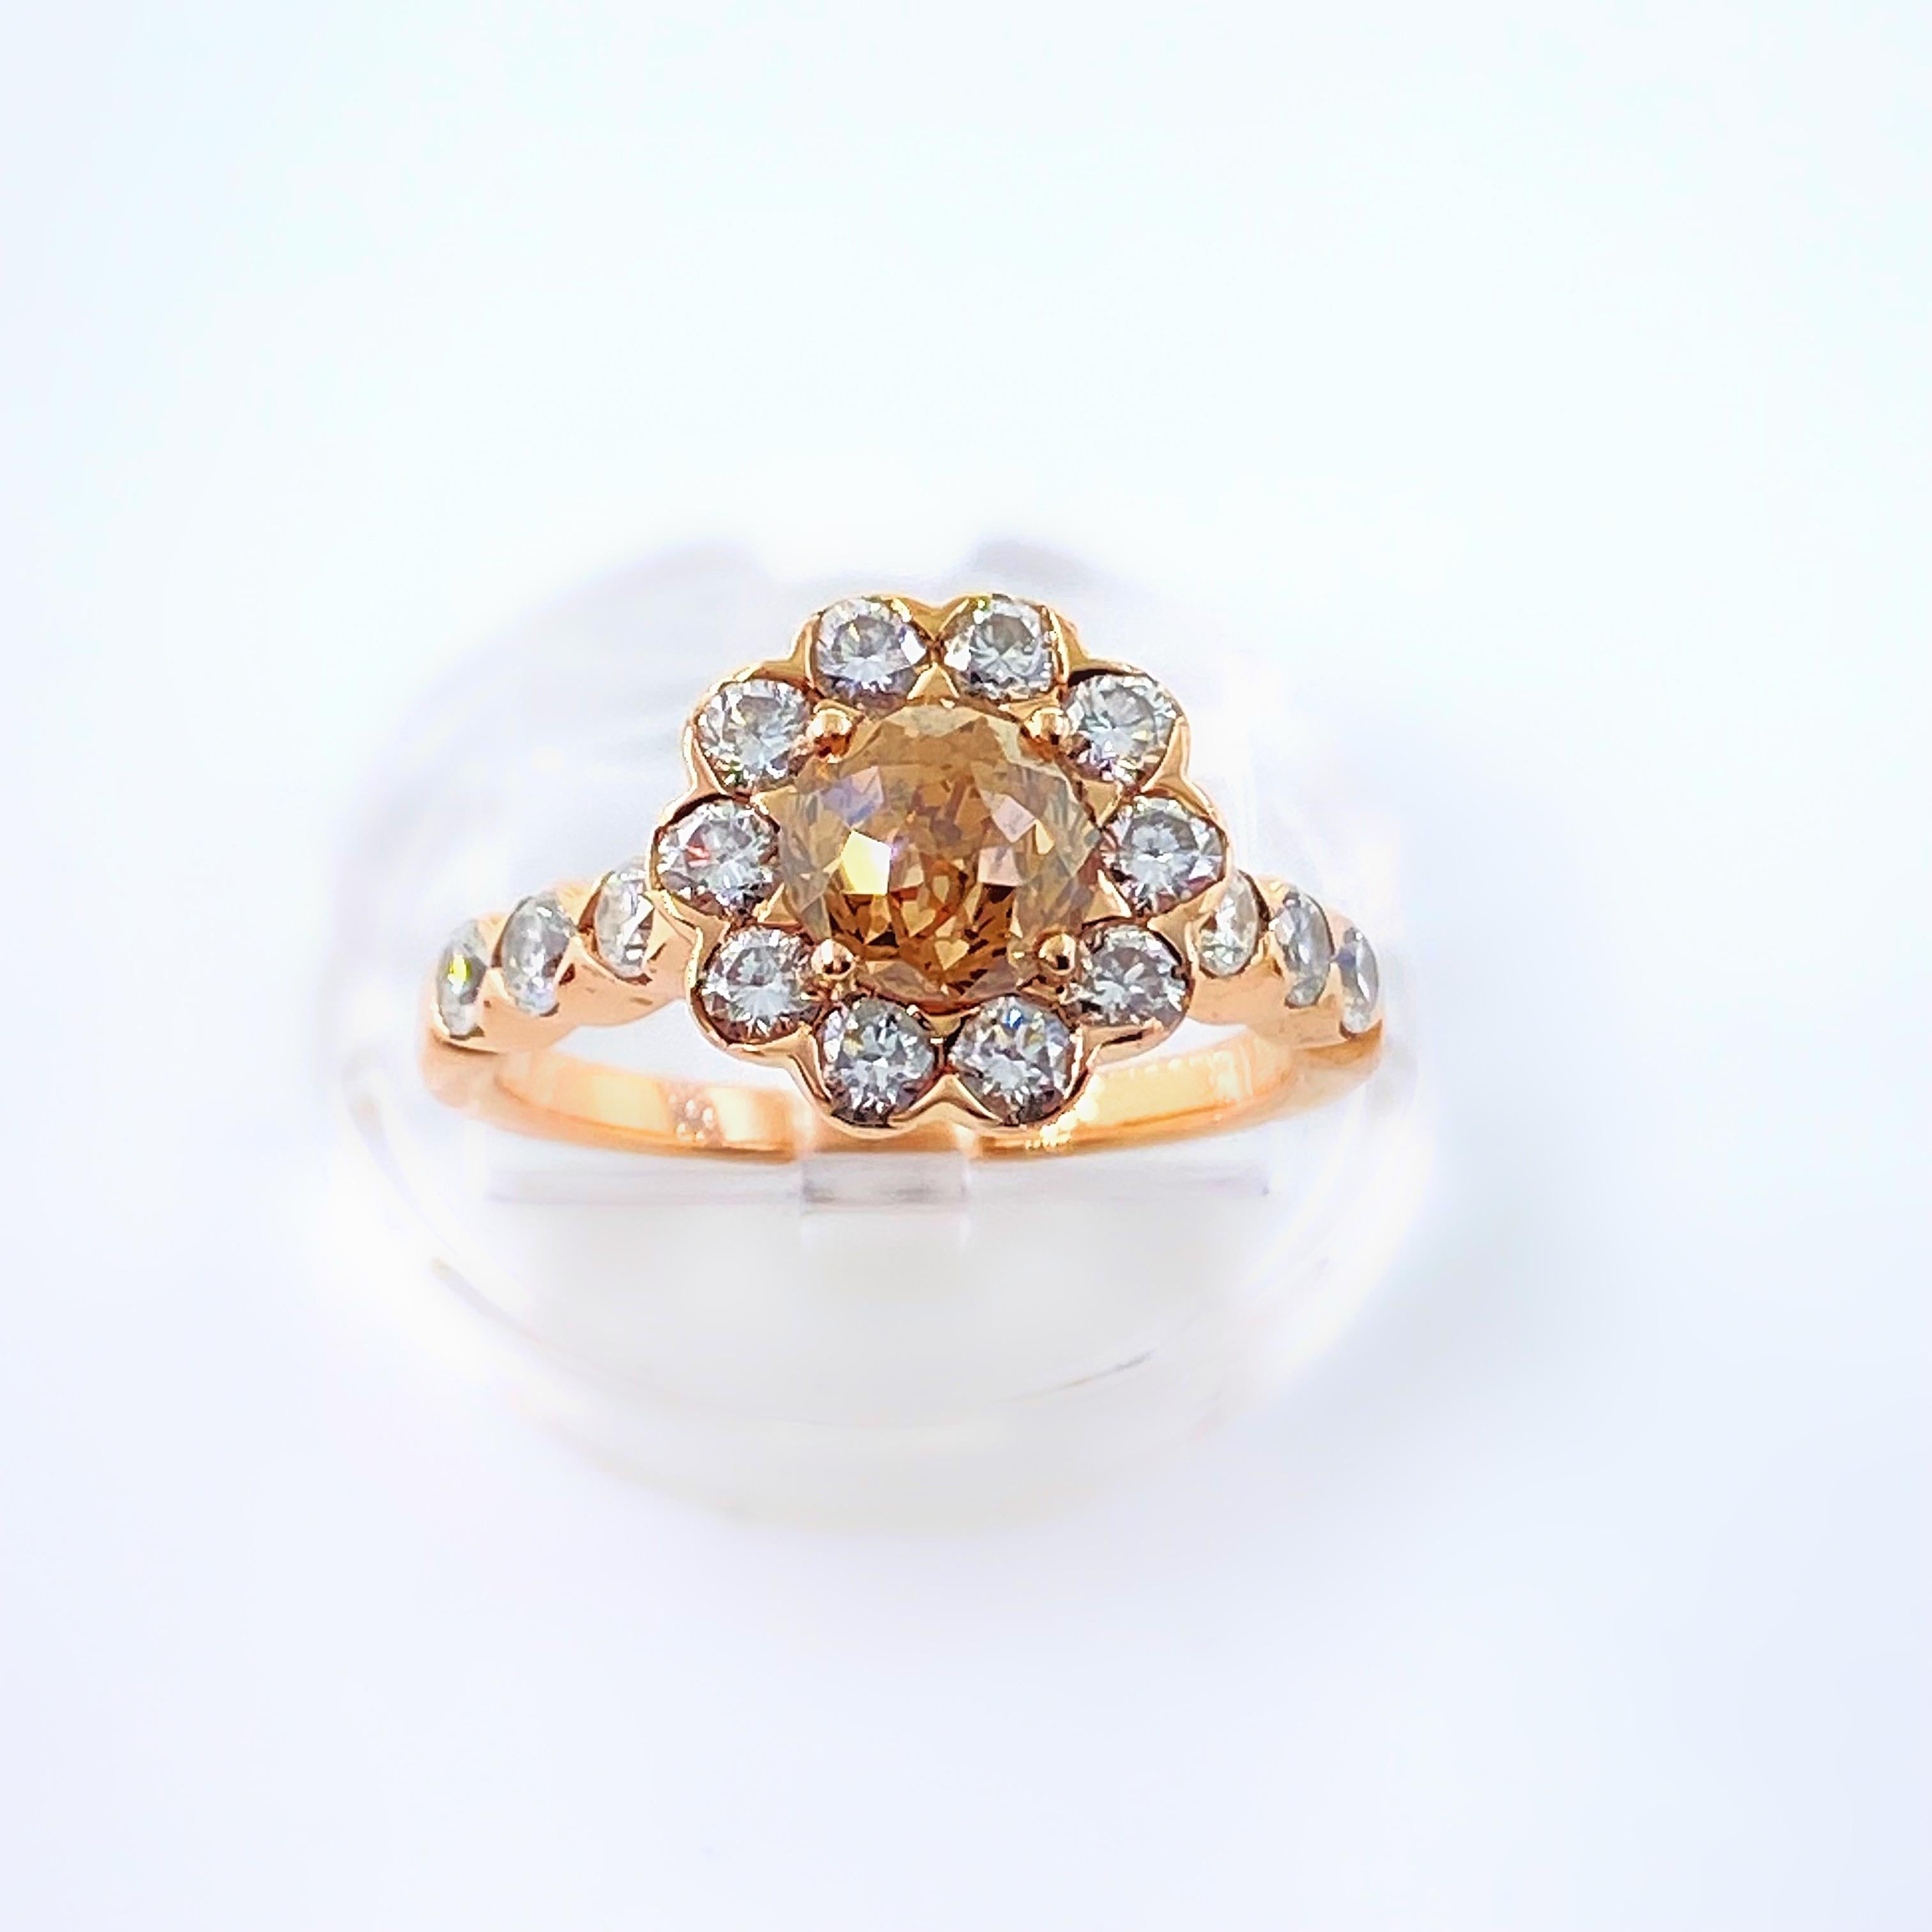 Crown of Light Fancy Dark Orangy Brown 2.40 tcw 18kt Rose Gold Engagement Ring In Excellent Condition For Sale In San Diego, CA